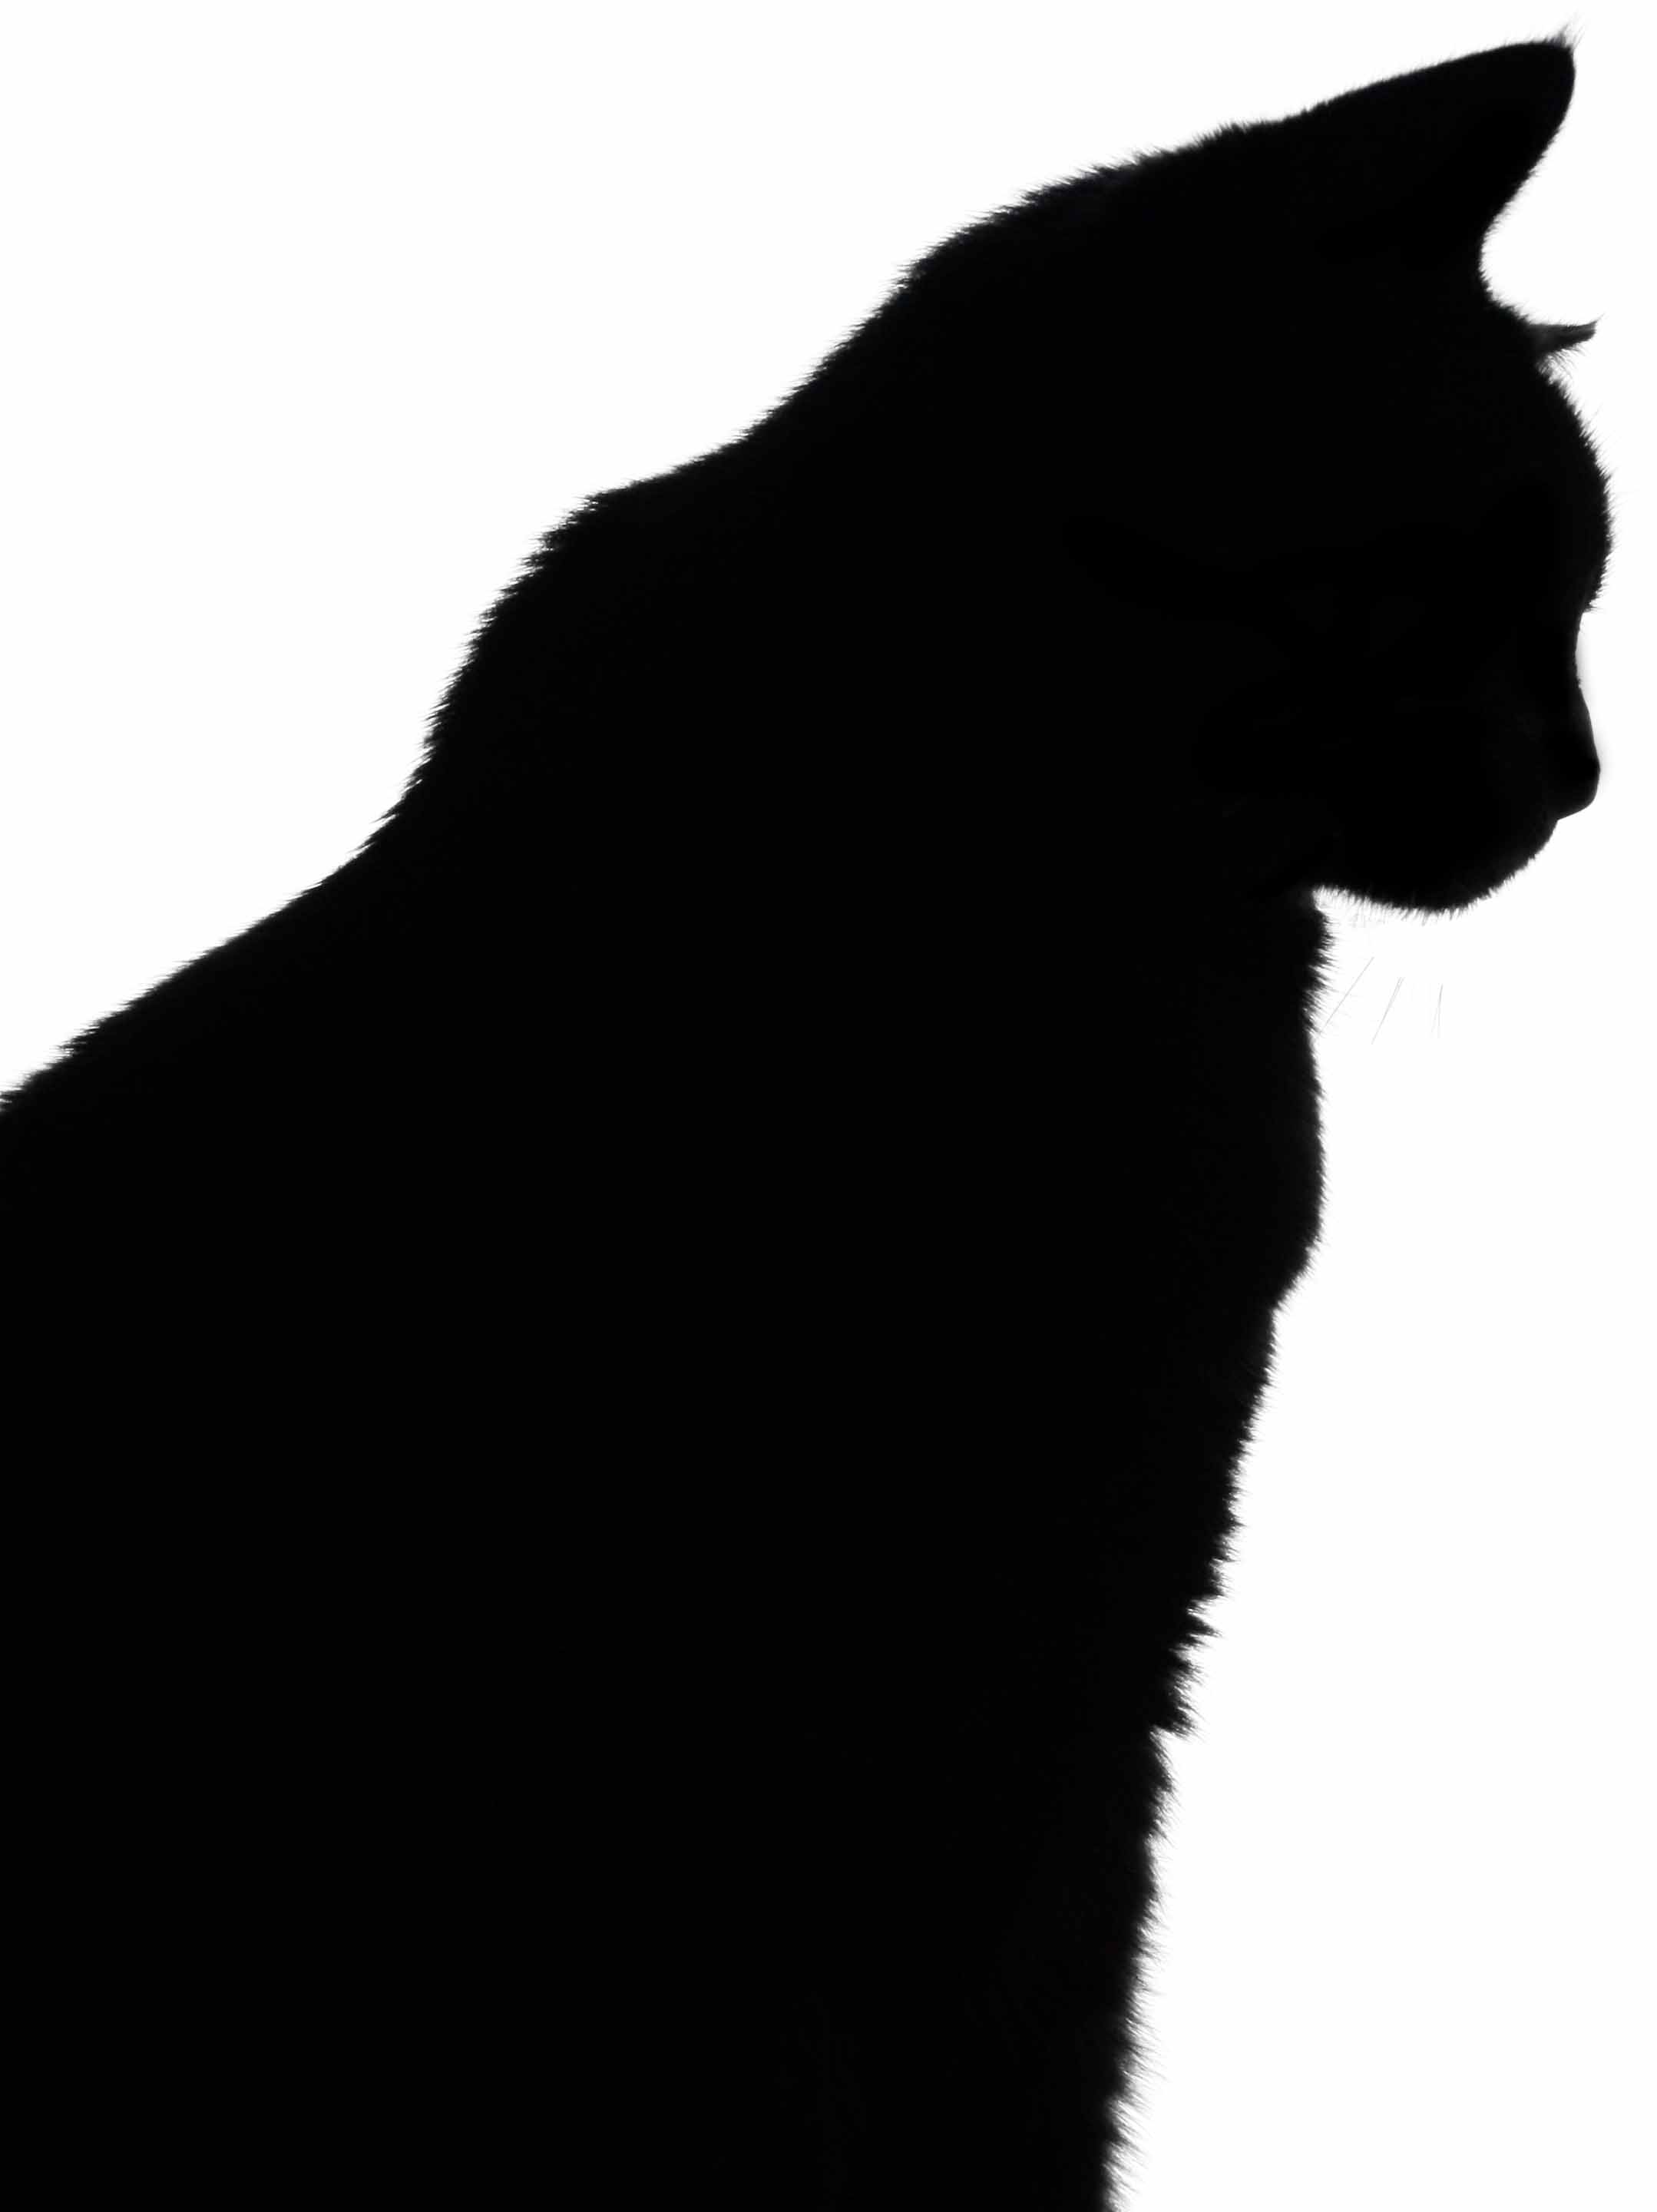 clipart image silhouette of a cat - photo #41